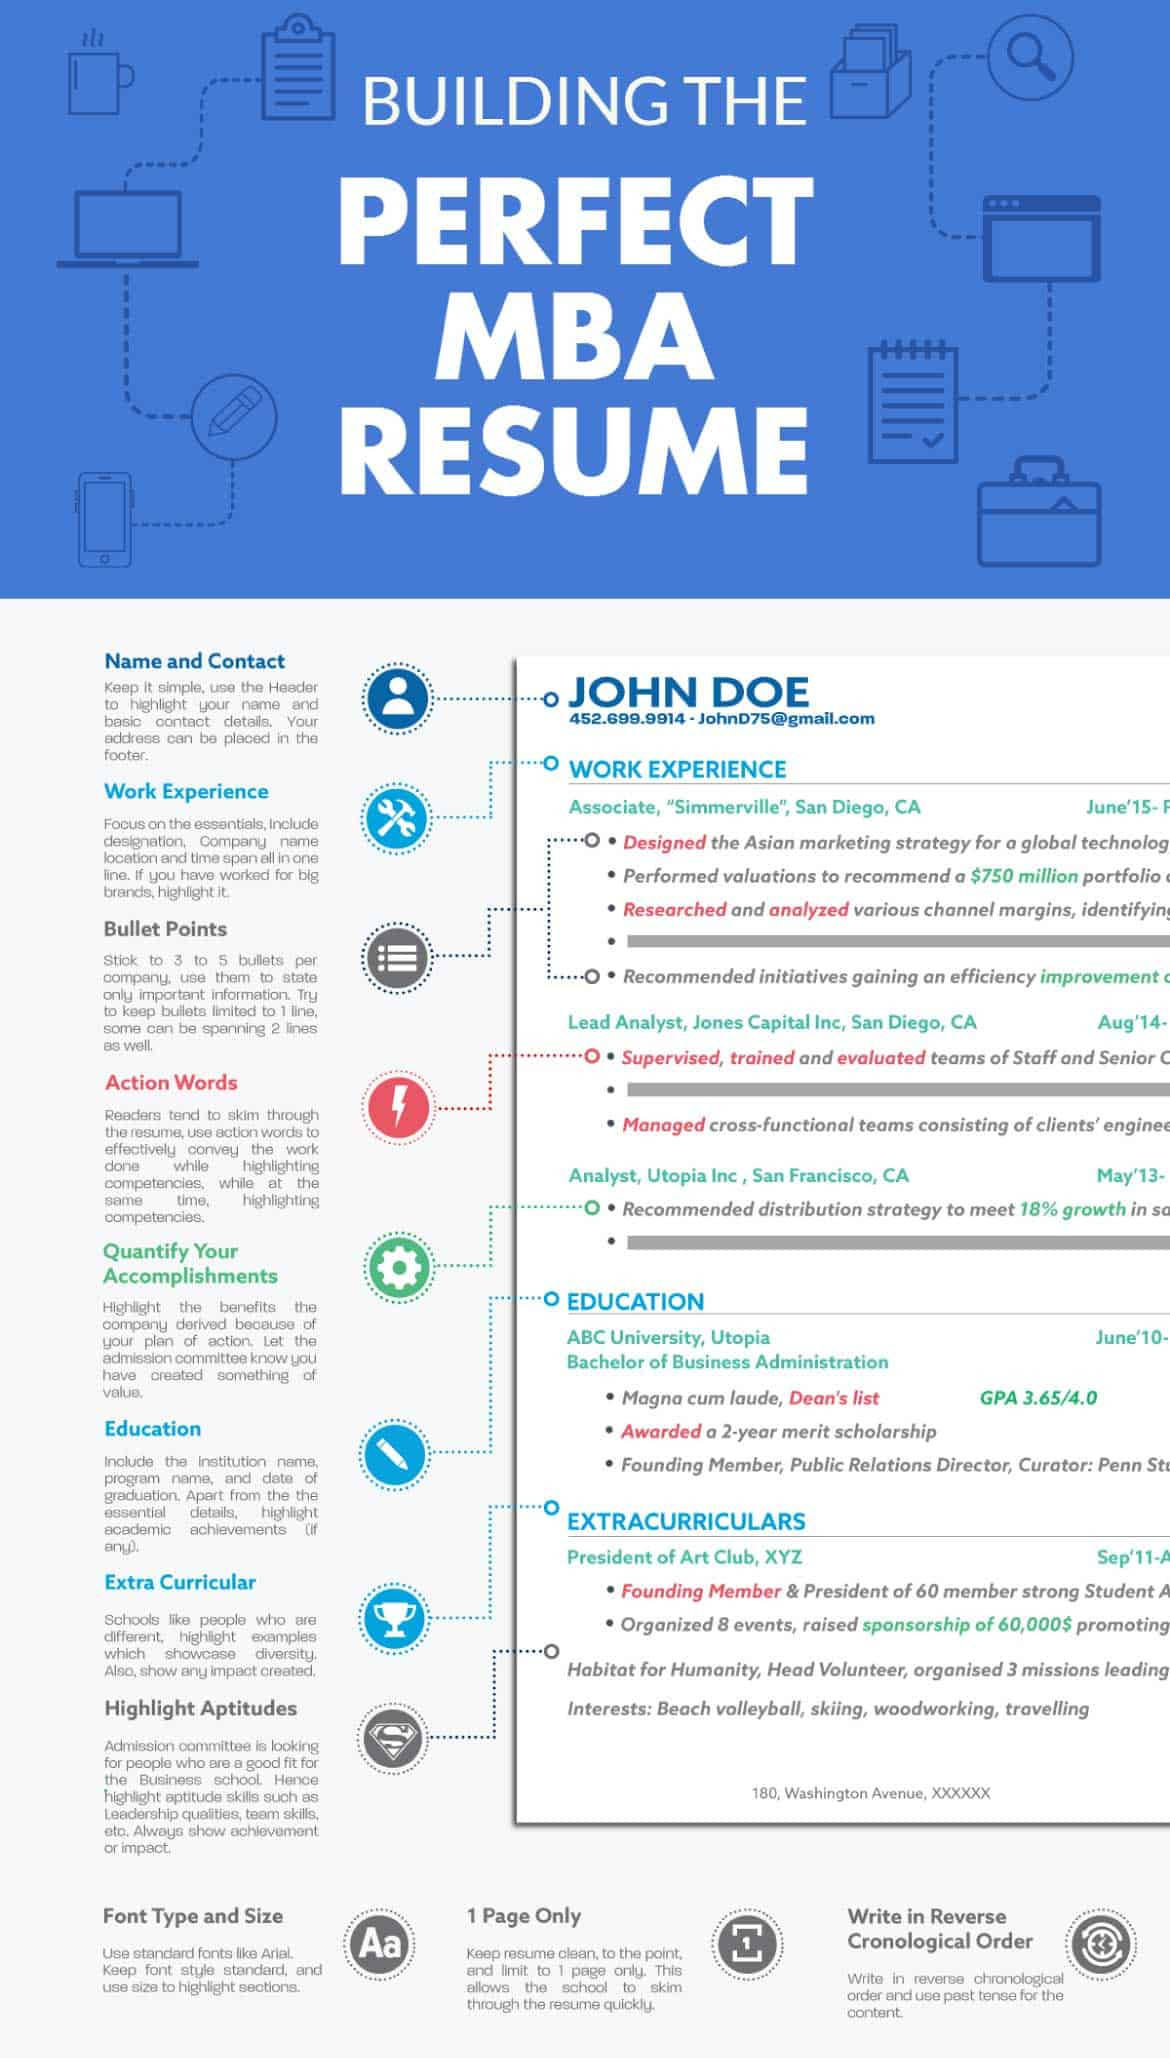 Smu Cox School Of Business Resume Template 10 Steps towards Creating the Perfect Mba Resume